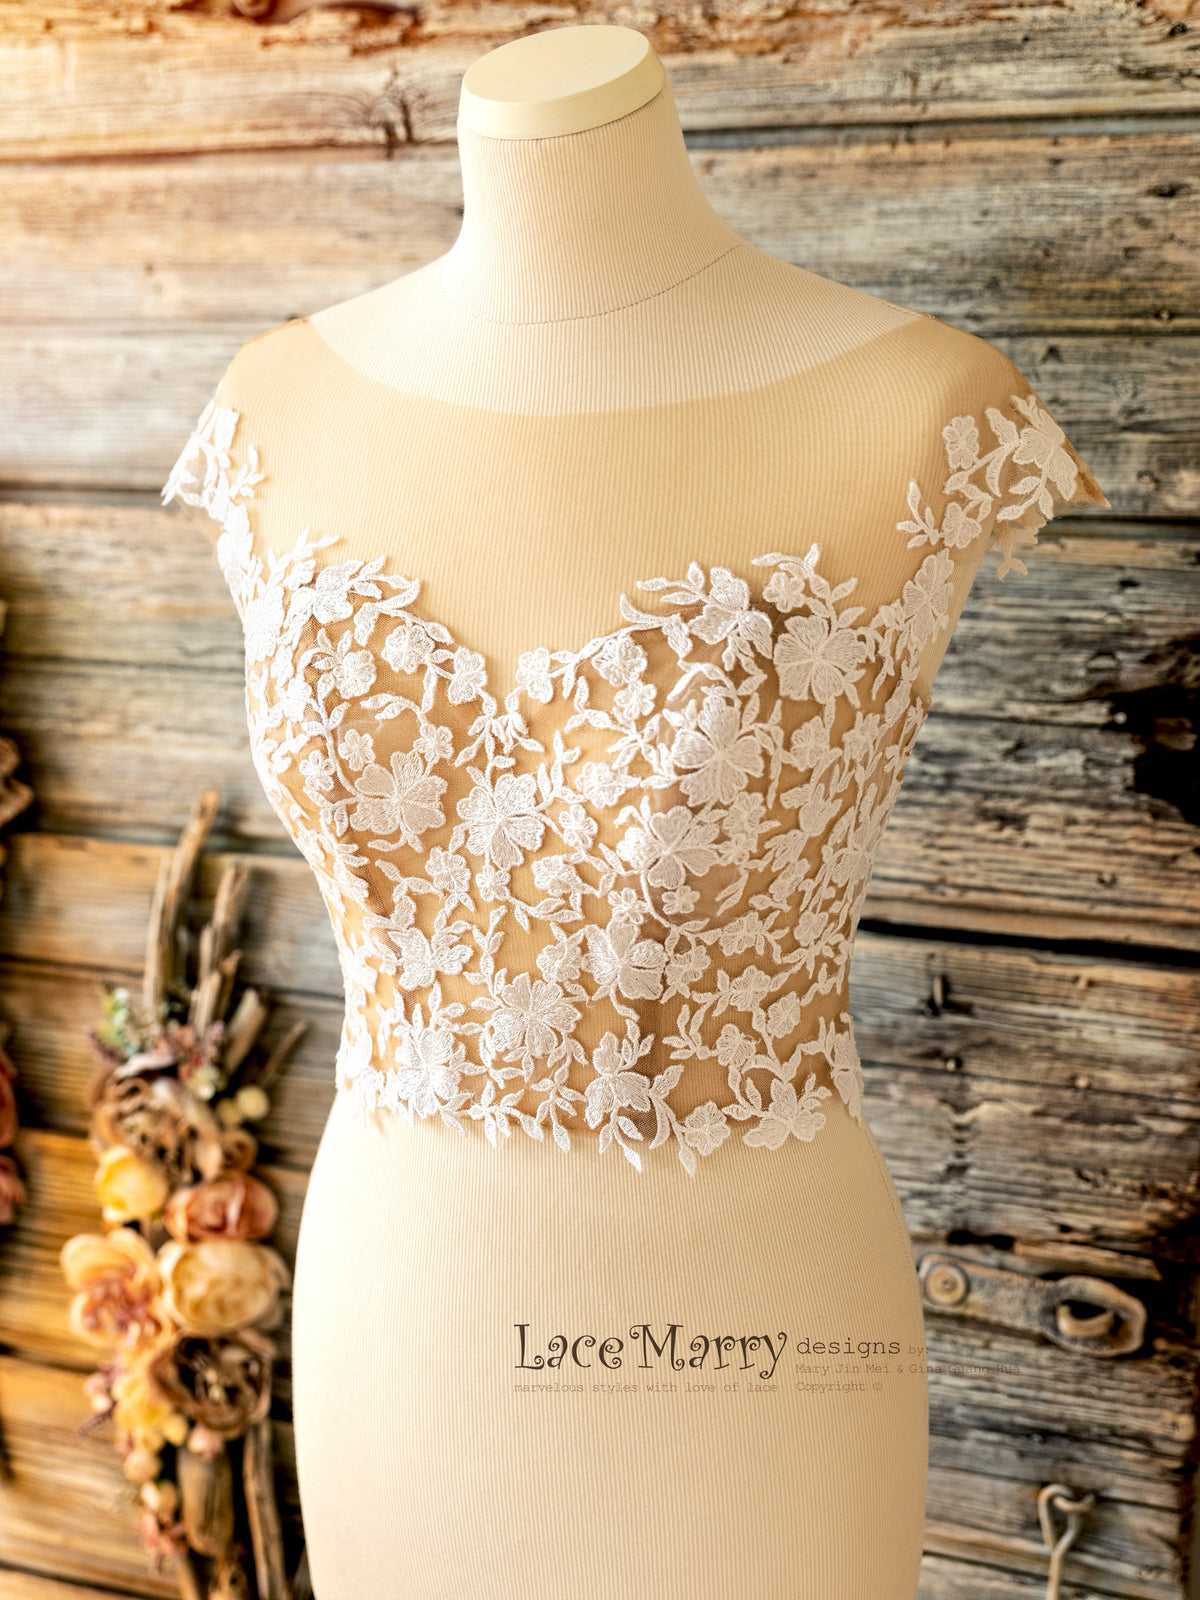 Custom Made Lace Topper by LaceMarry